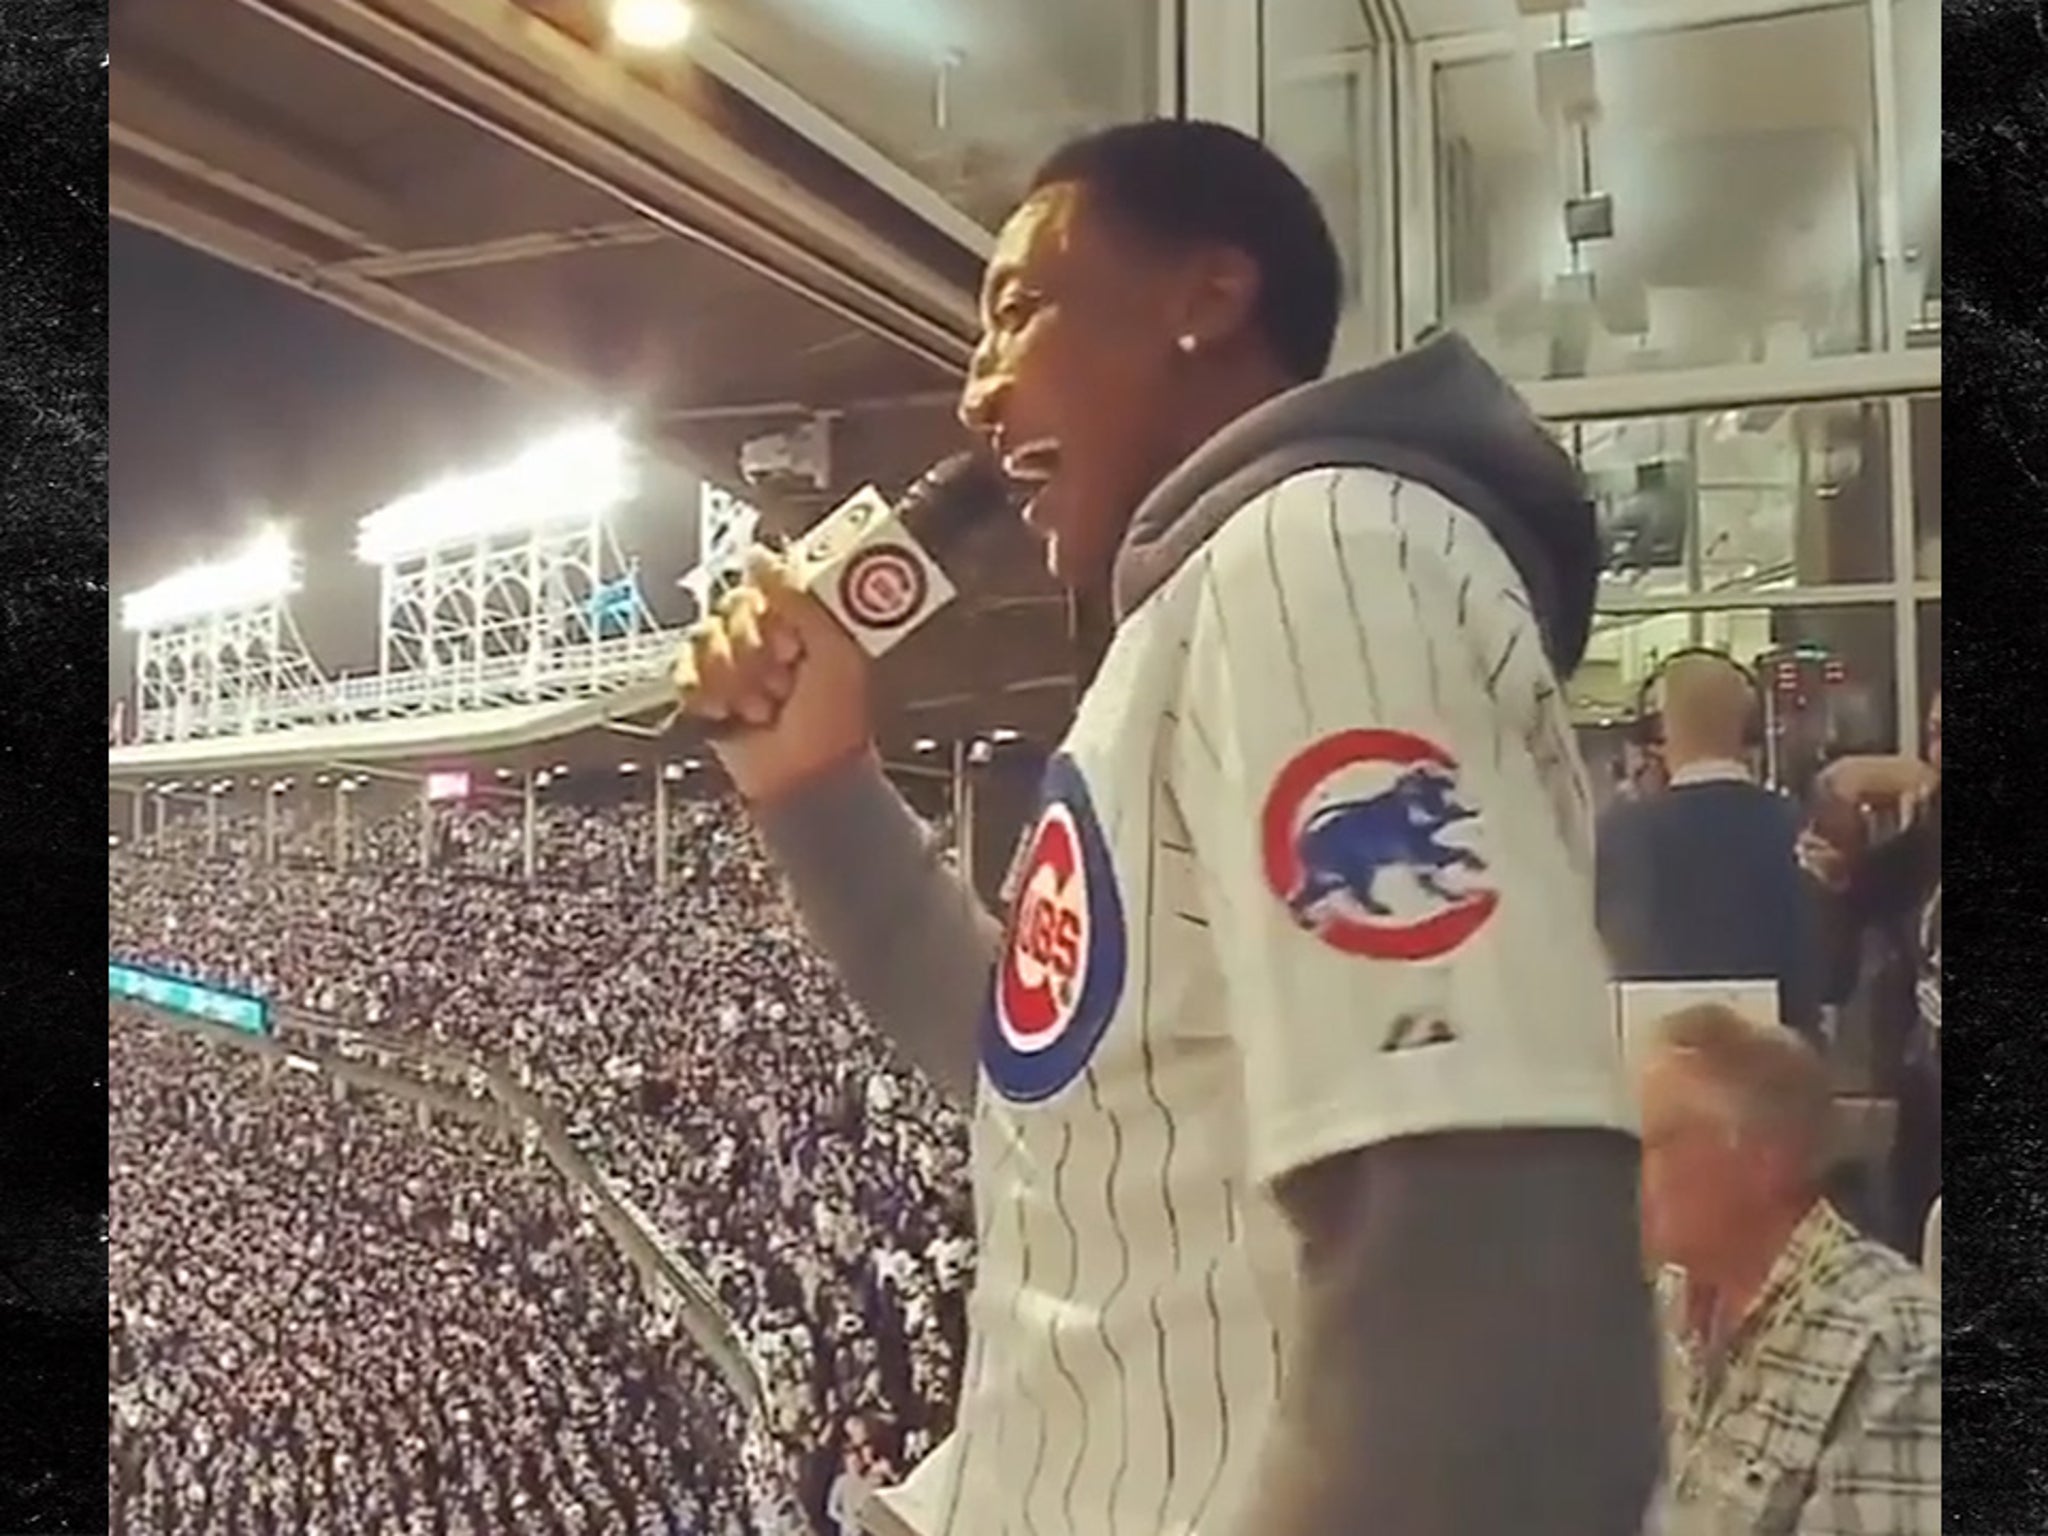 Bill Murray belts out 'Take Me Out to the Ball Game' at Wrigley Field